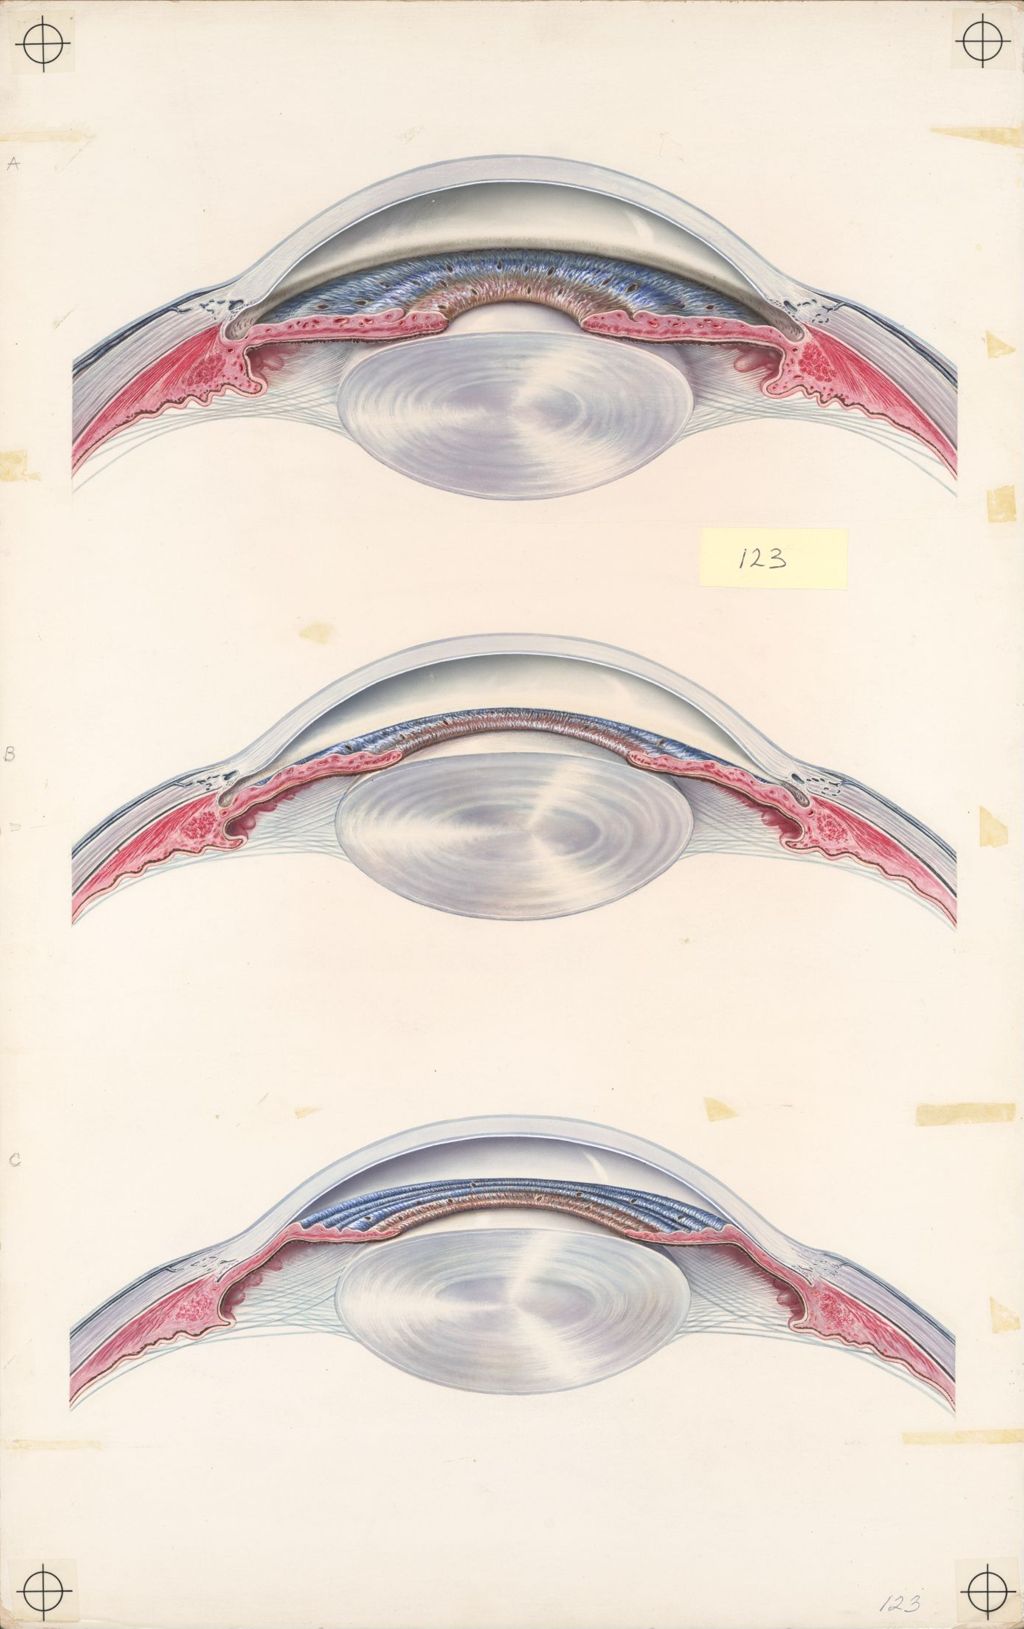 Medical Profiles, Glaucoma, Plate I, The Anterior Portion of the Eye